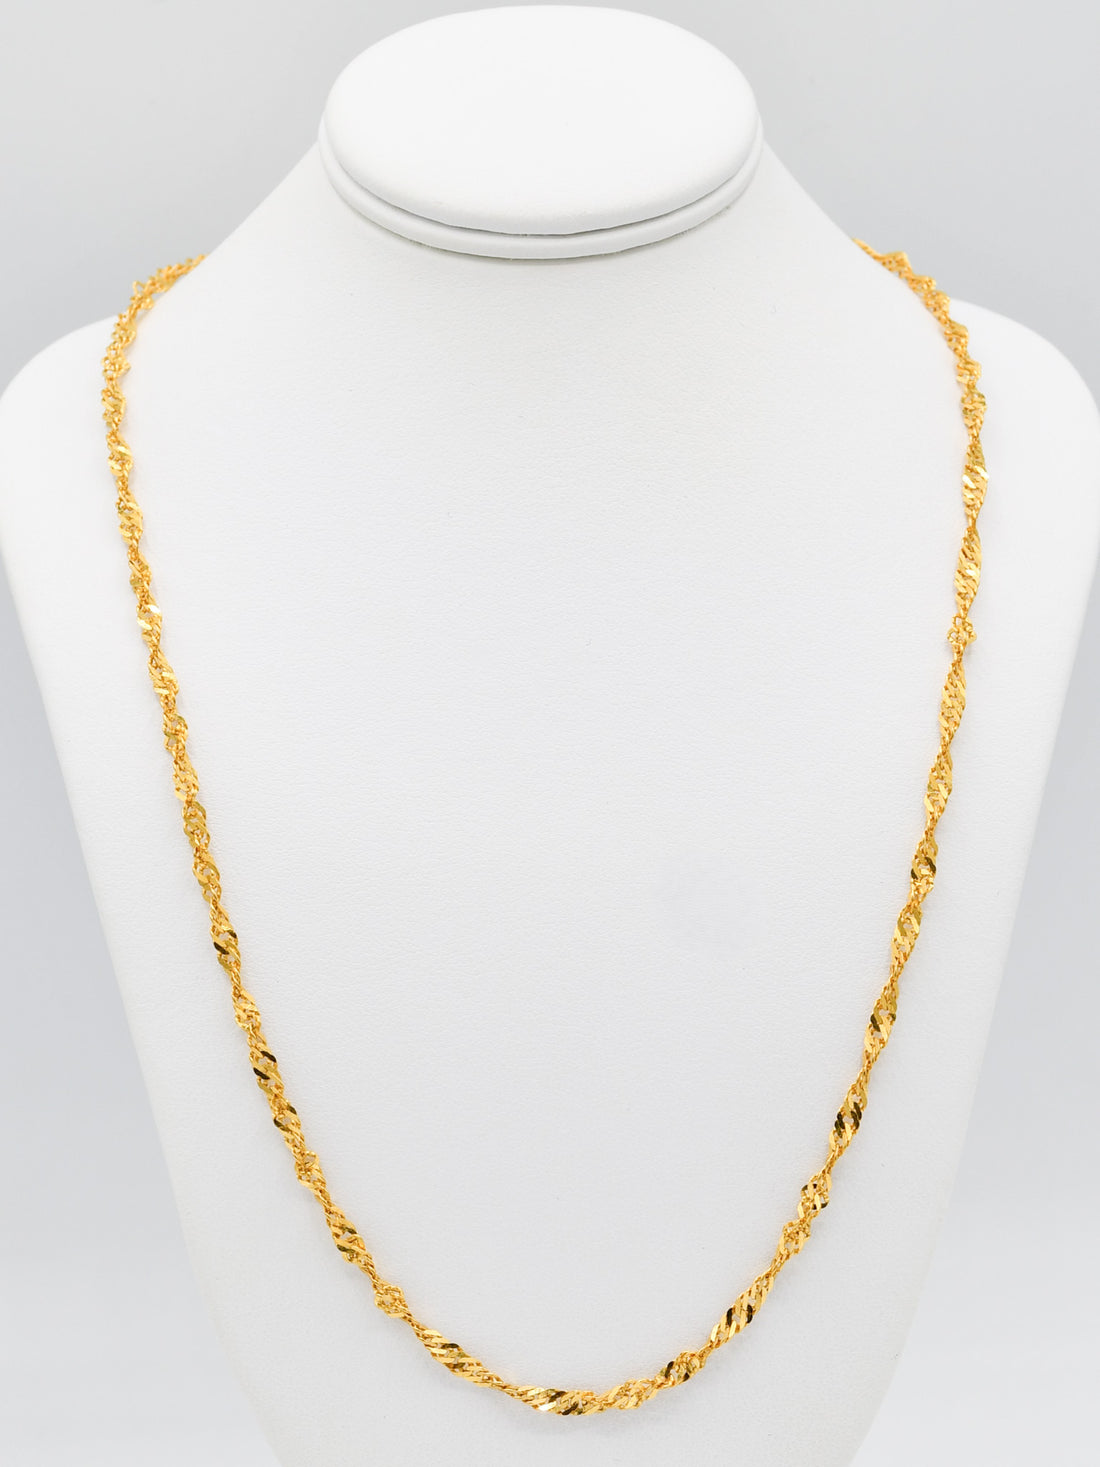 22ct Gold Twisted Chain